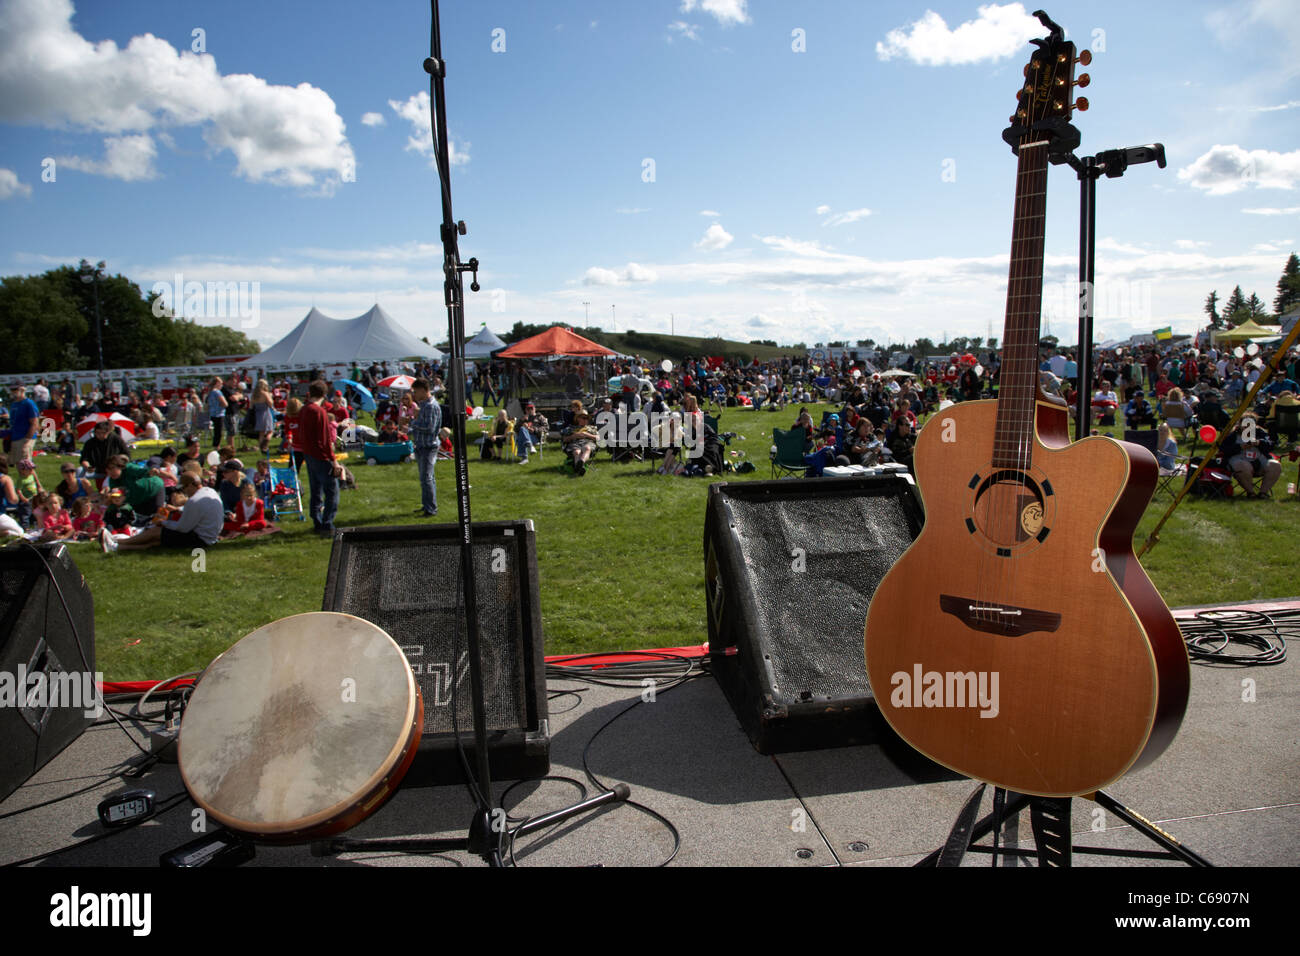 takamine acoustic electic guitar bodran drum and monitor speakers on stage at a summer outdoor festival Saskatoon Saskatchewan Stock Photo